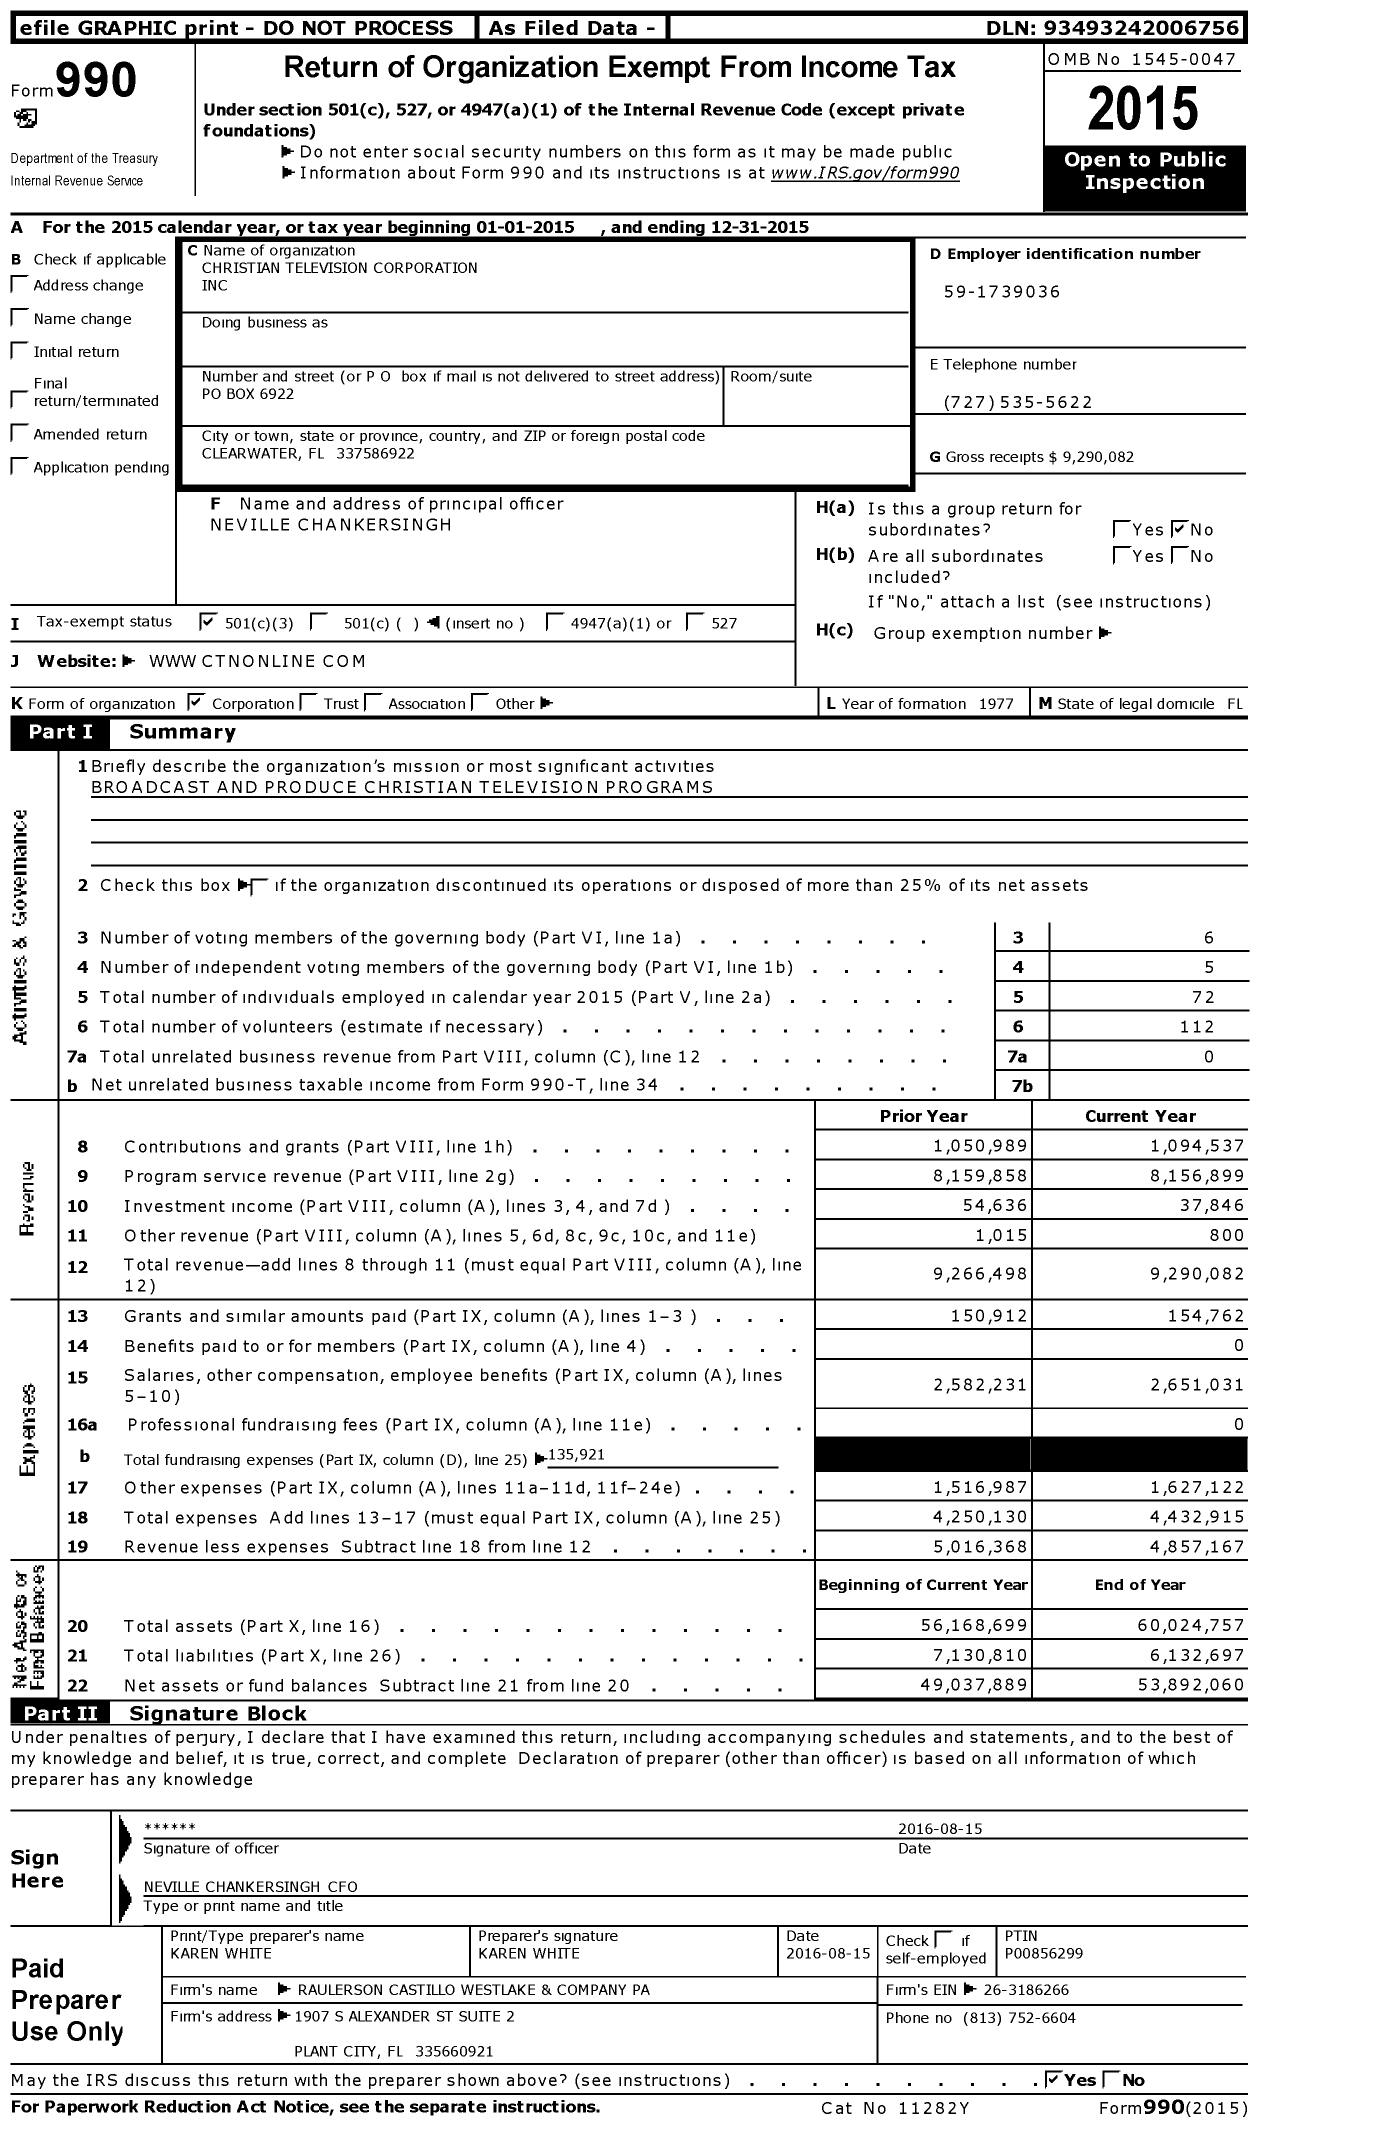 Image of first page of 2015 Form 990 for Christian Television Corporation (CTN)